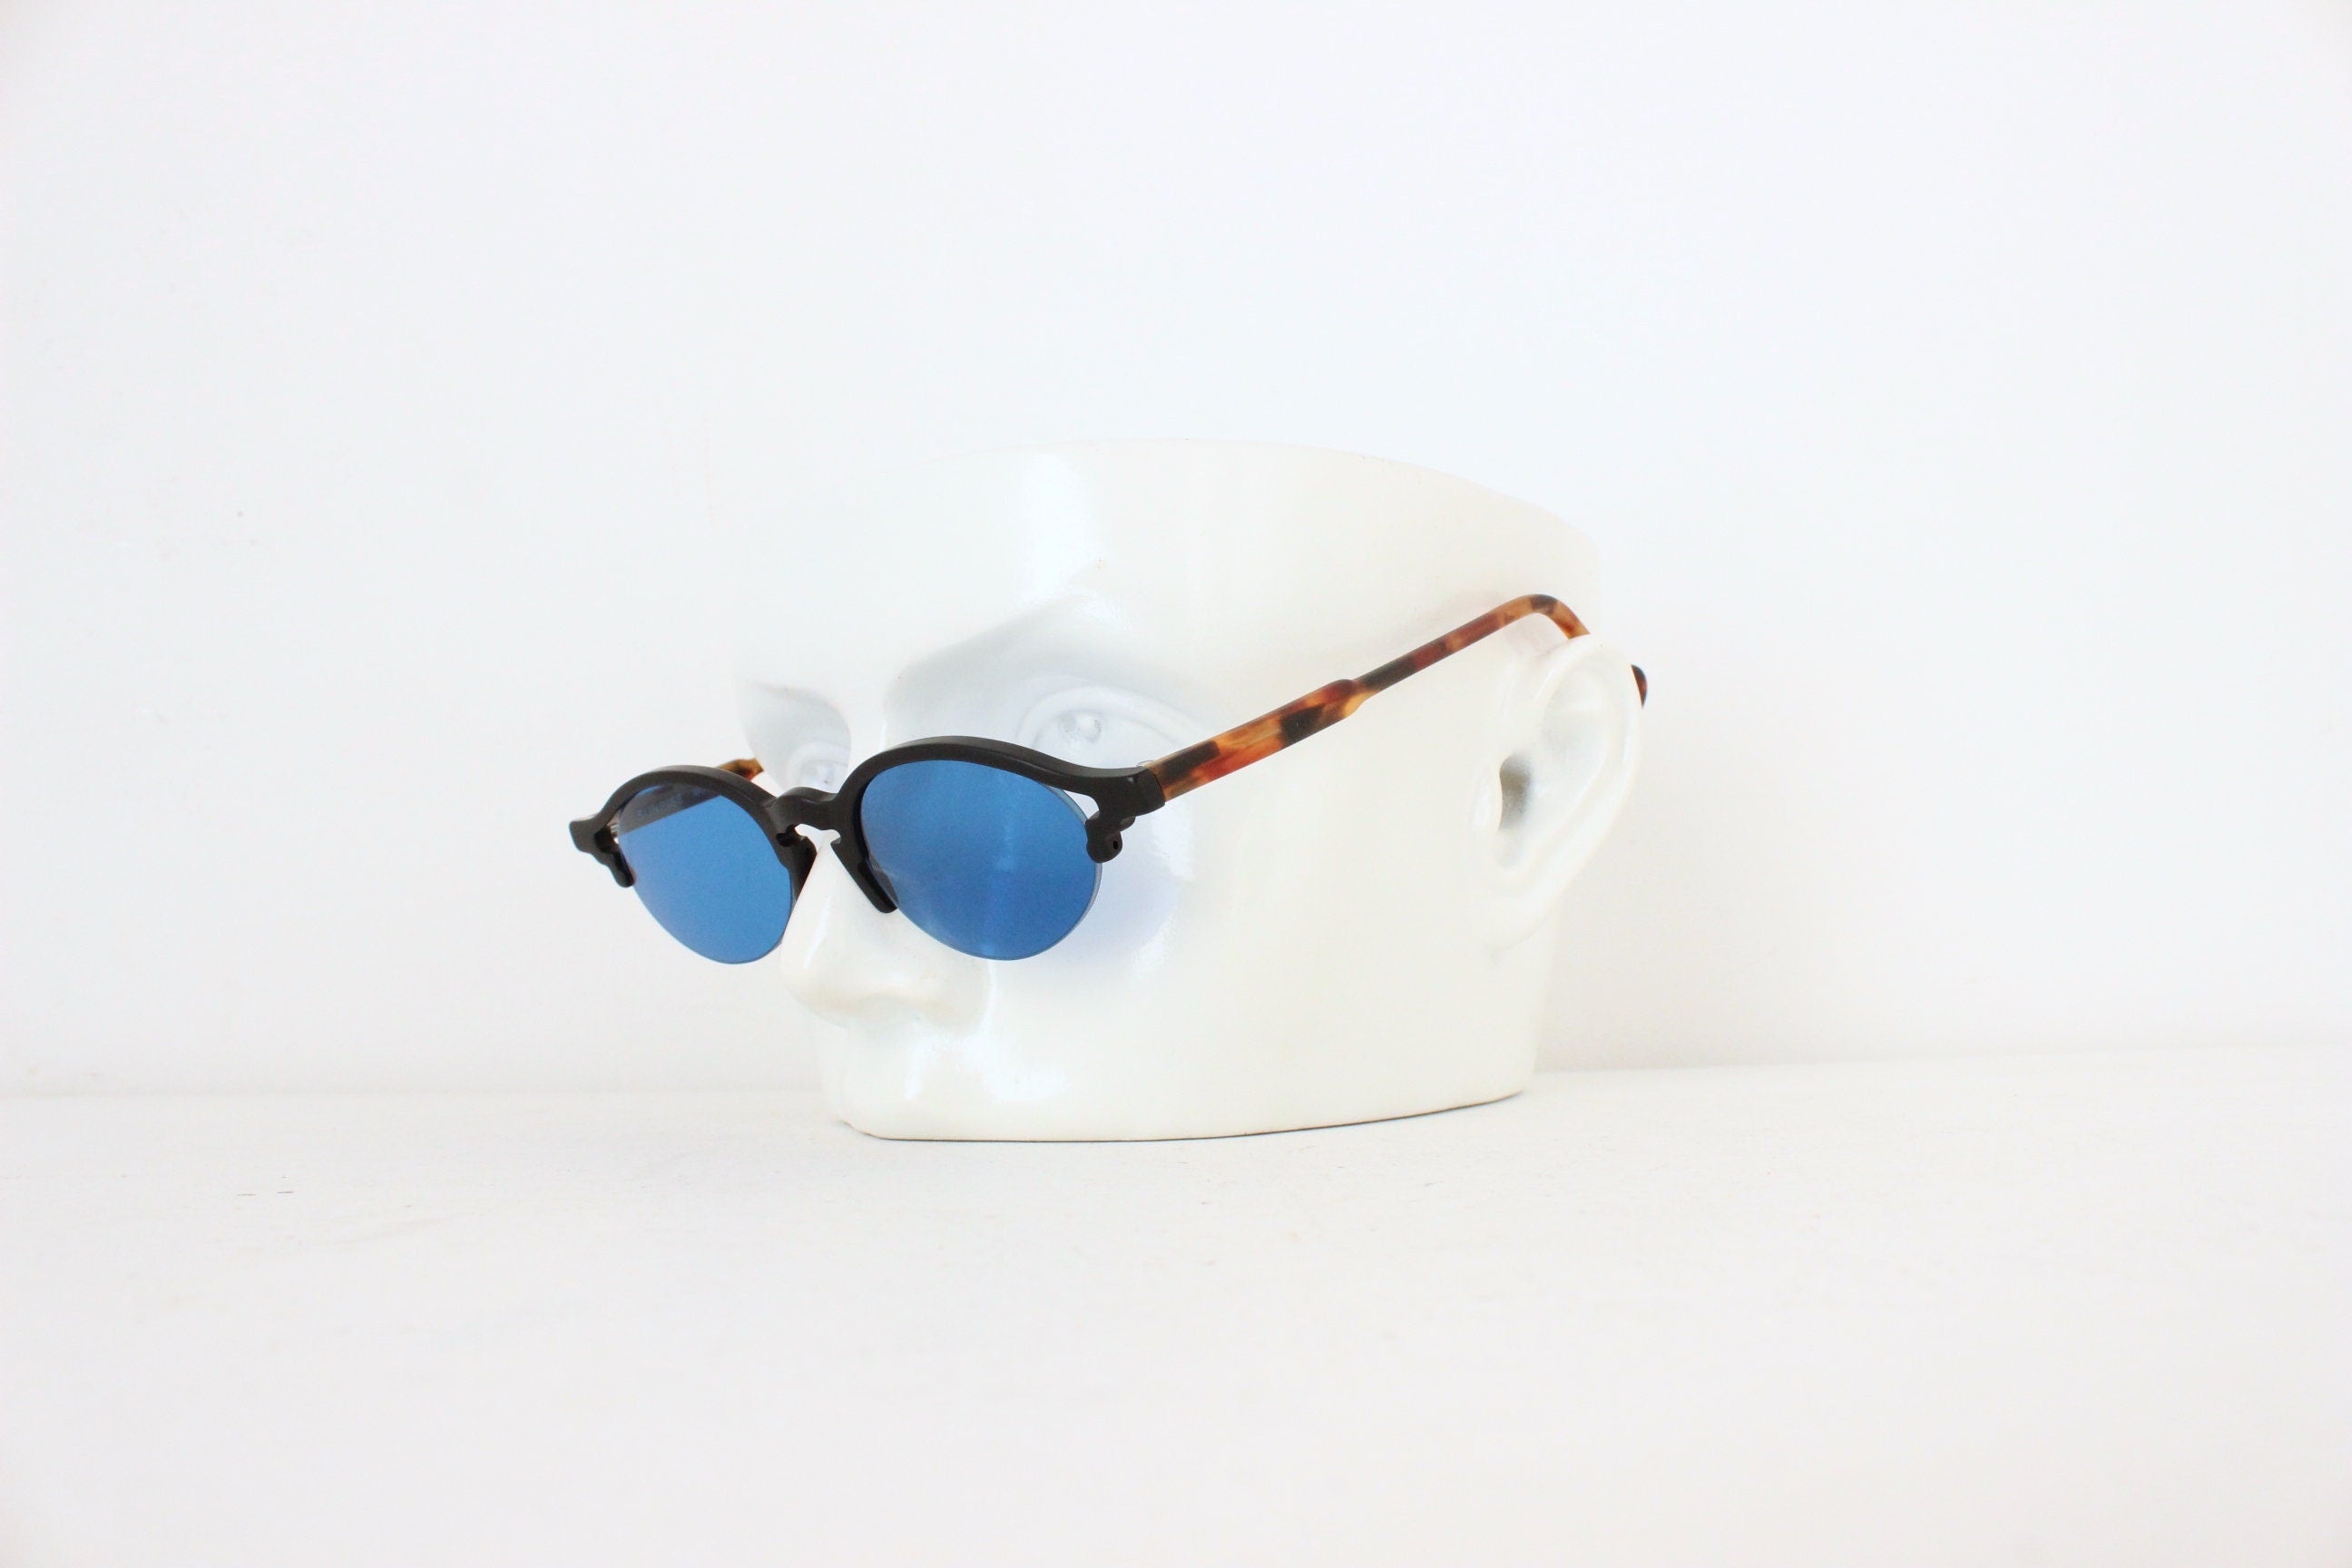 Funky 1990s Blue Lens Sunglasses by Eschenbach Germany